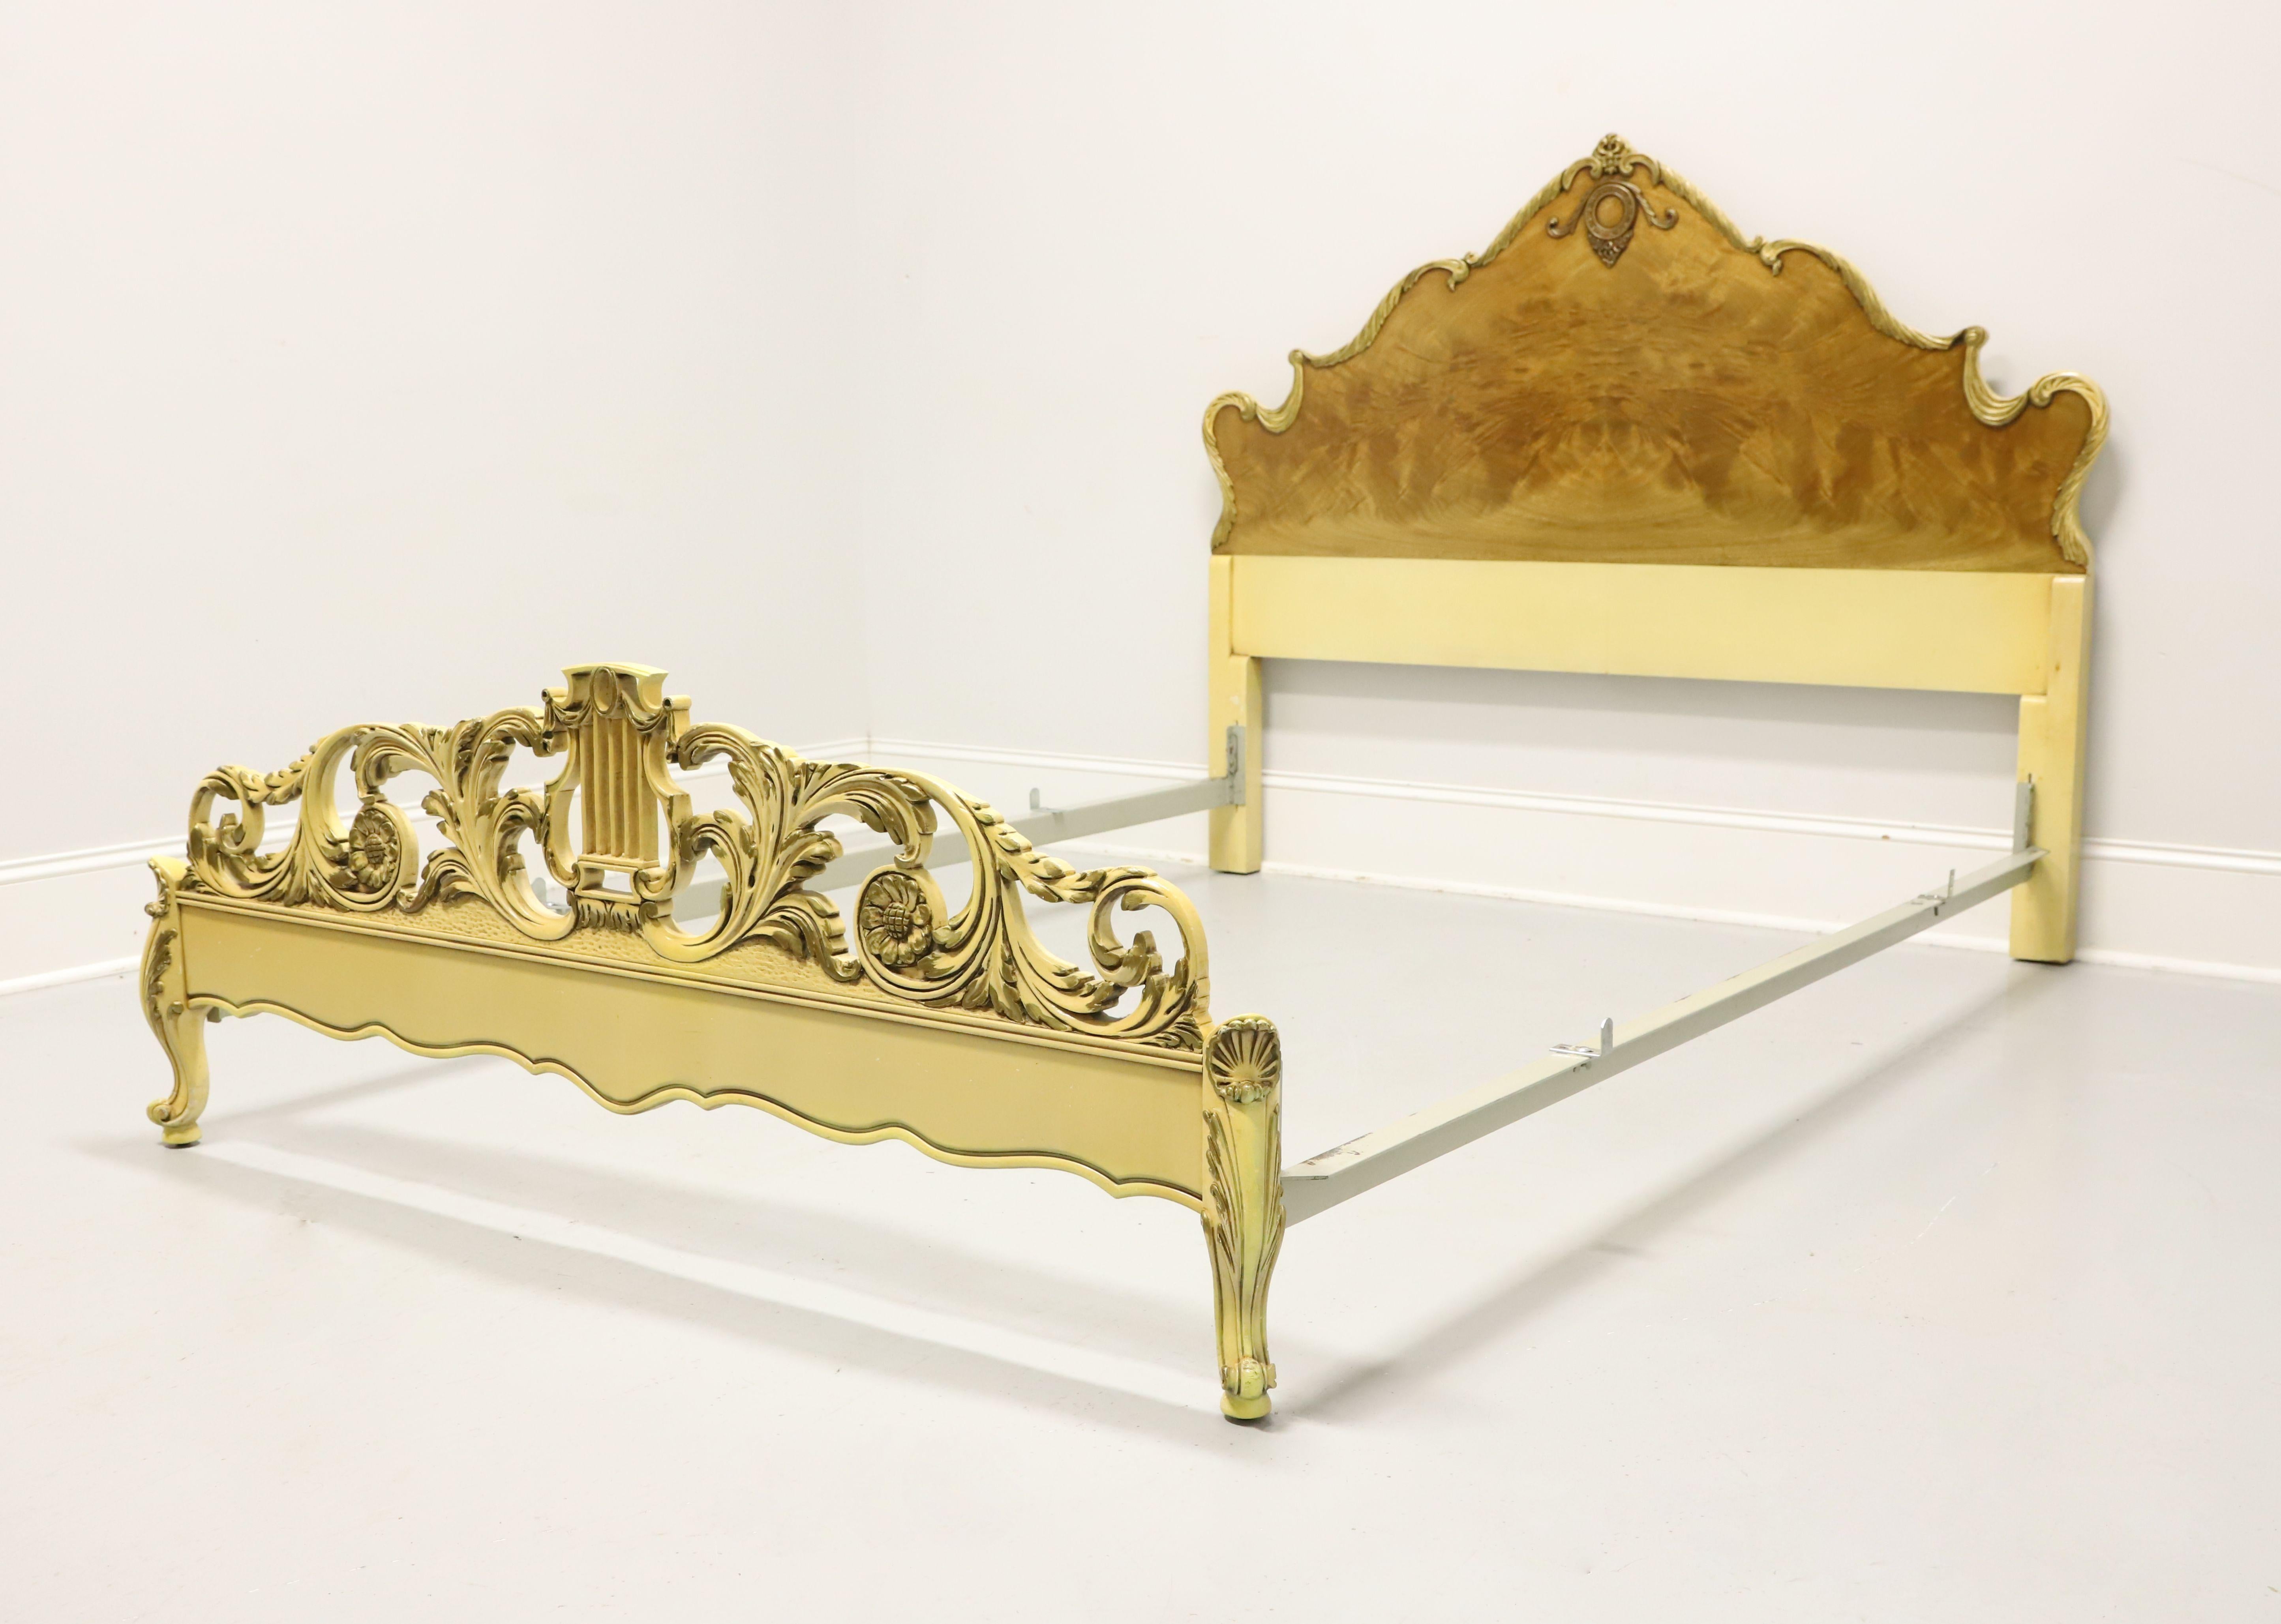 A French Provincial style queen size bed by Romweber Furniture, from their Marquise Collection. Solid wood painted an antique white with satinwood to the headboard, decoratively carved headboard & footboard with scrollwork, and clip held metal side